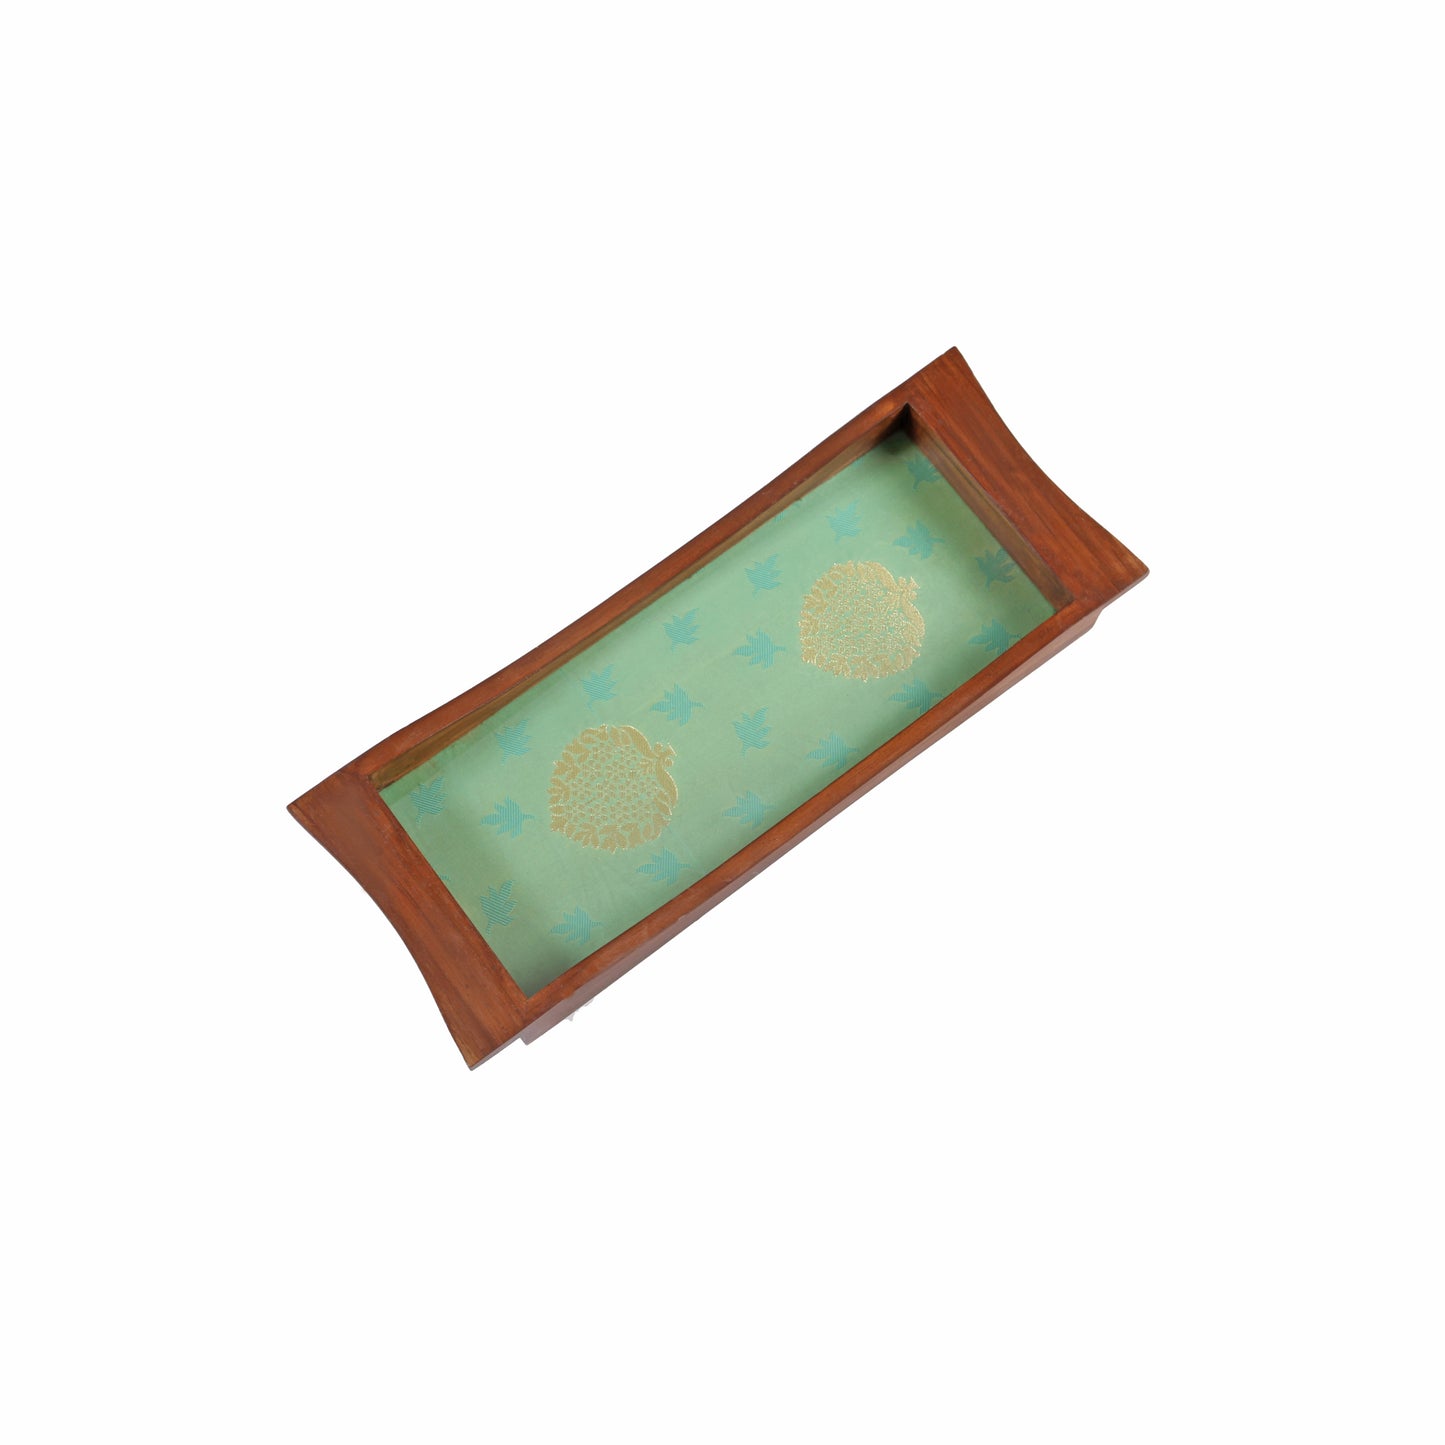 A Tiny Mistake Elegant Green Brocade Boat Shaped Teak Serving Tray, Tray for Serving Tea and Snacks, 35 x 15 x 4 cm